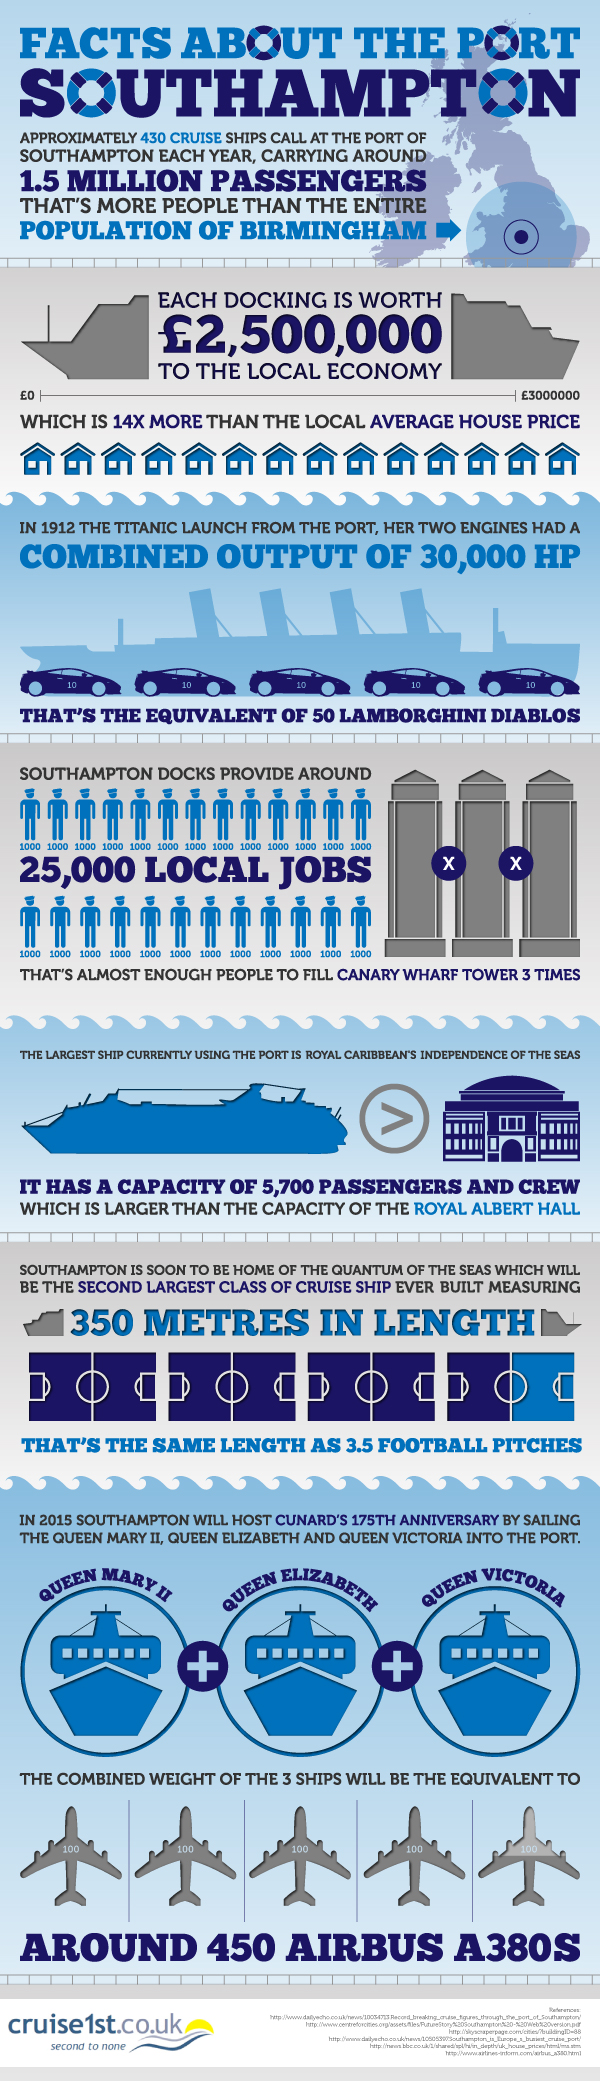 Facts About the Port Southampton [Infographic]